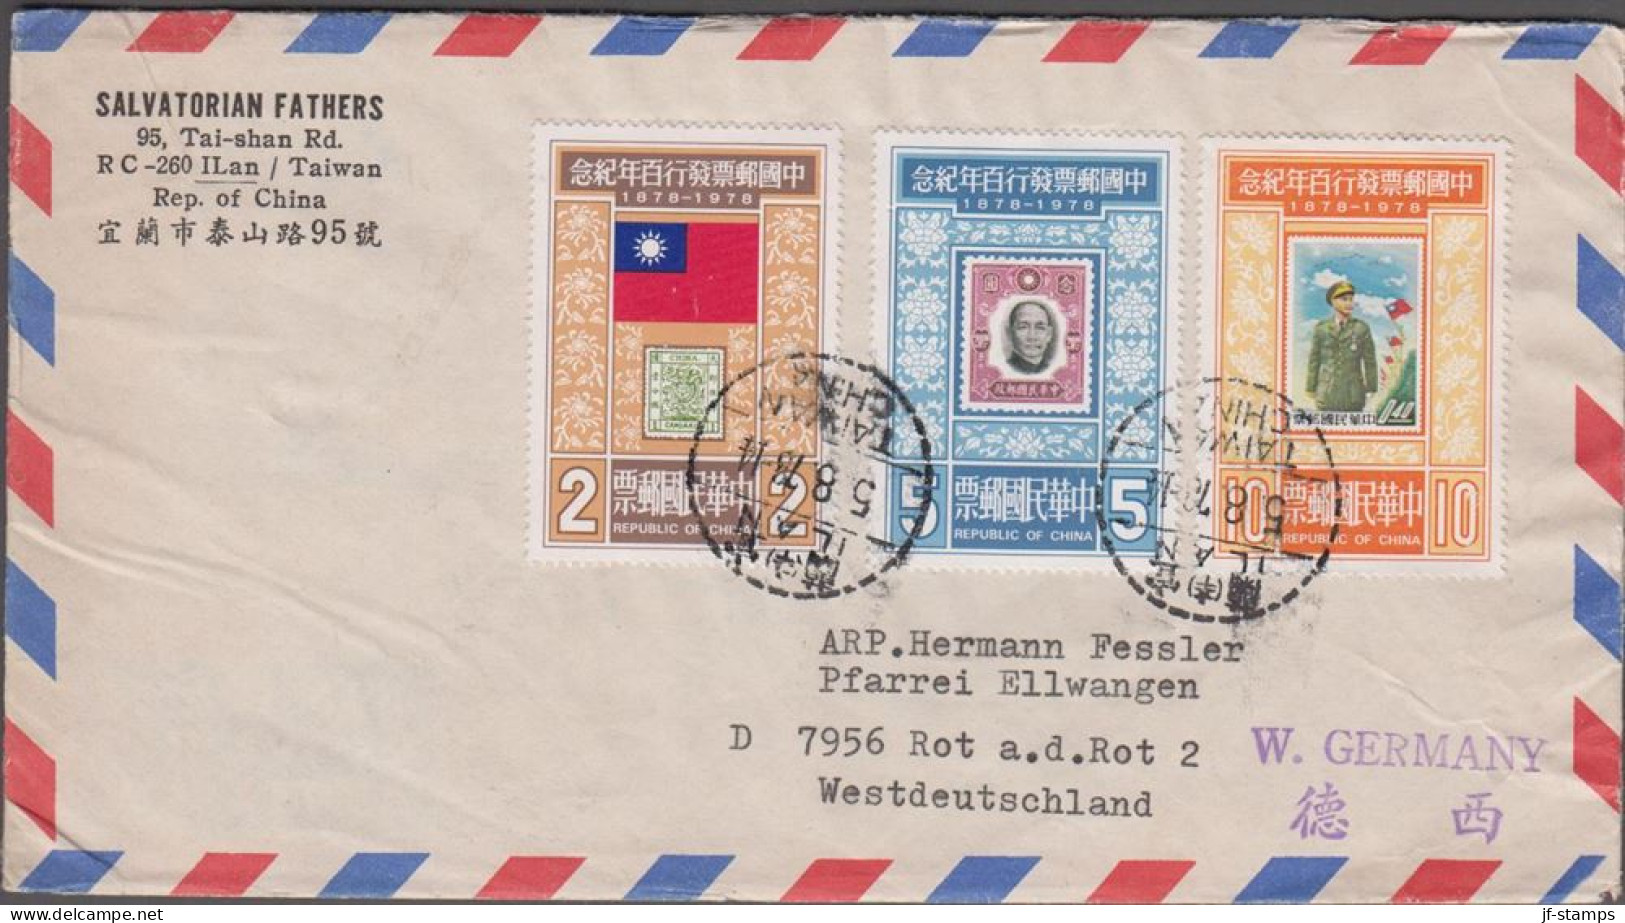 1978. TAIWAN. Complete Set 100 Years Stamps From China On Cover To Germany Cancelled TAIWAN 5 8 78. Sender... - JF524473 - Covers & Documents